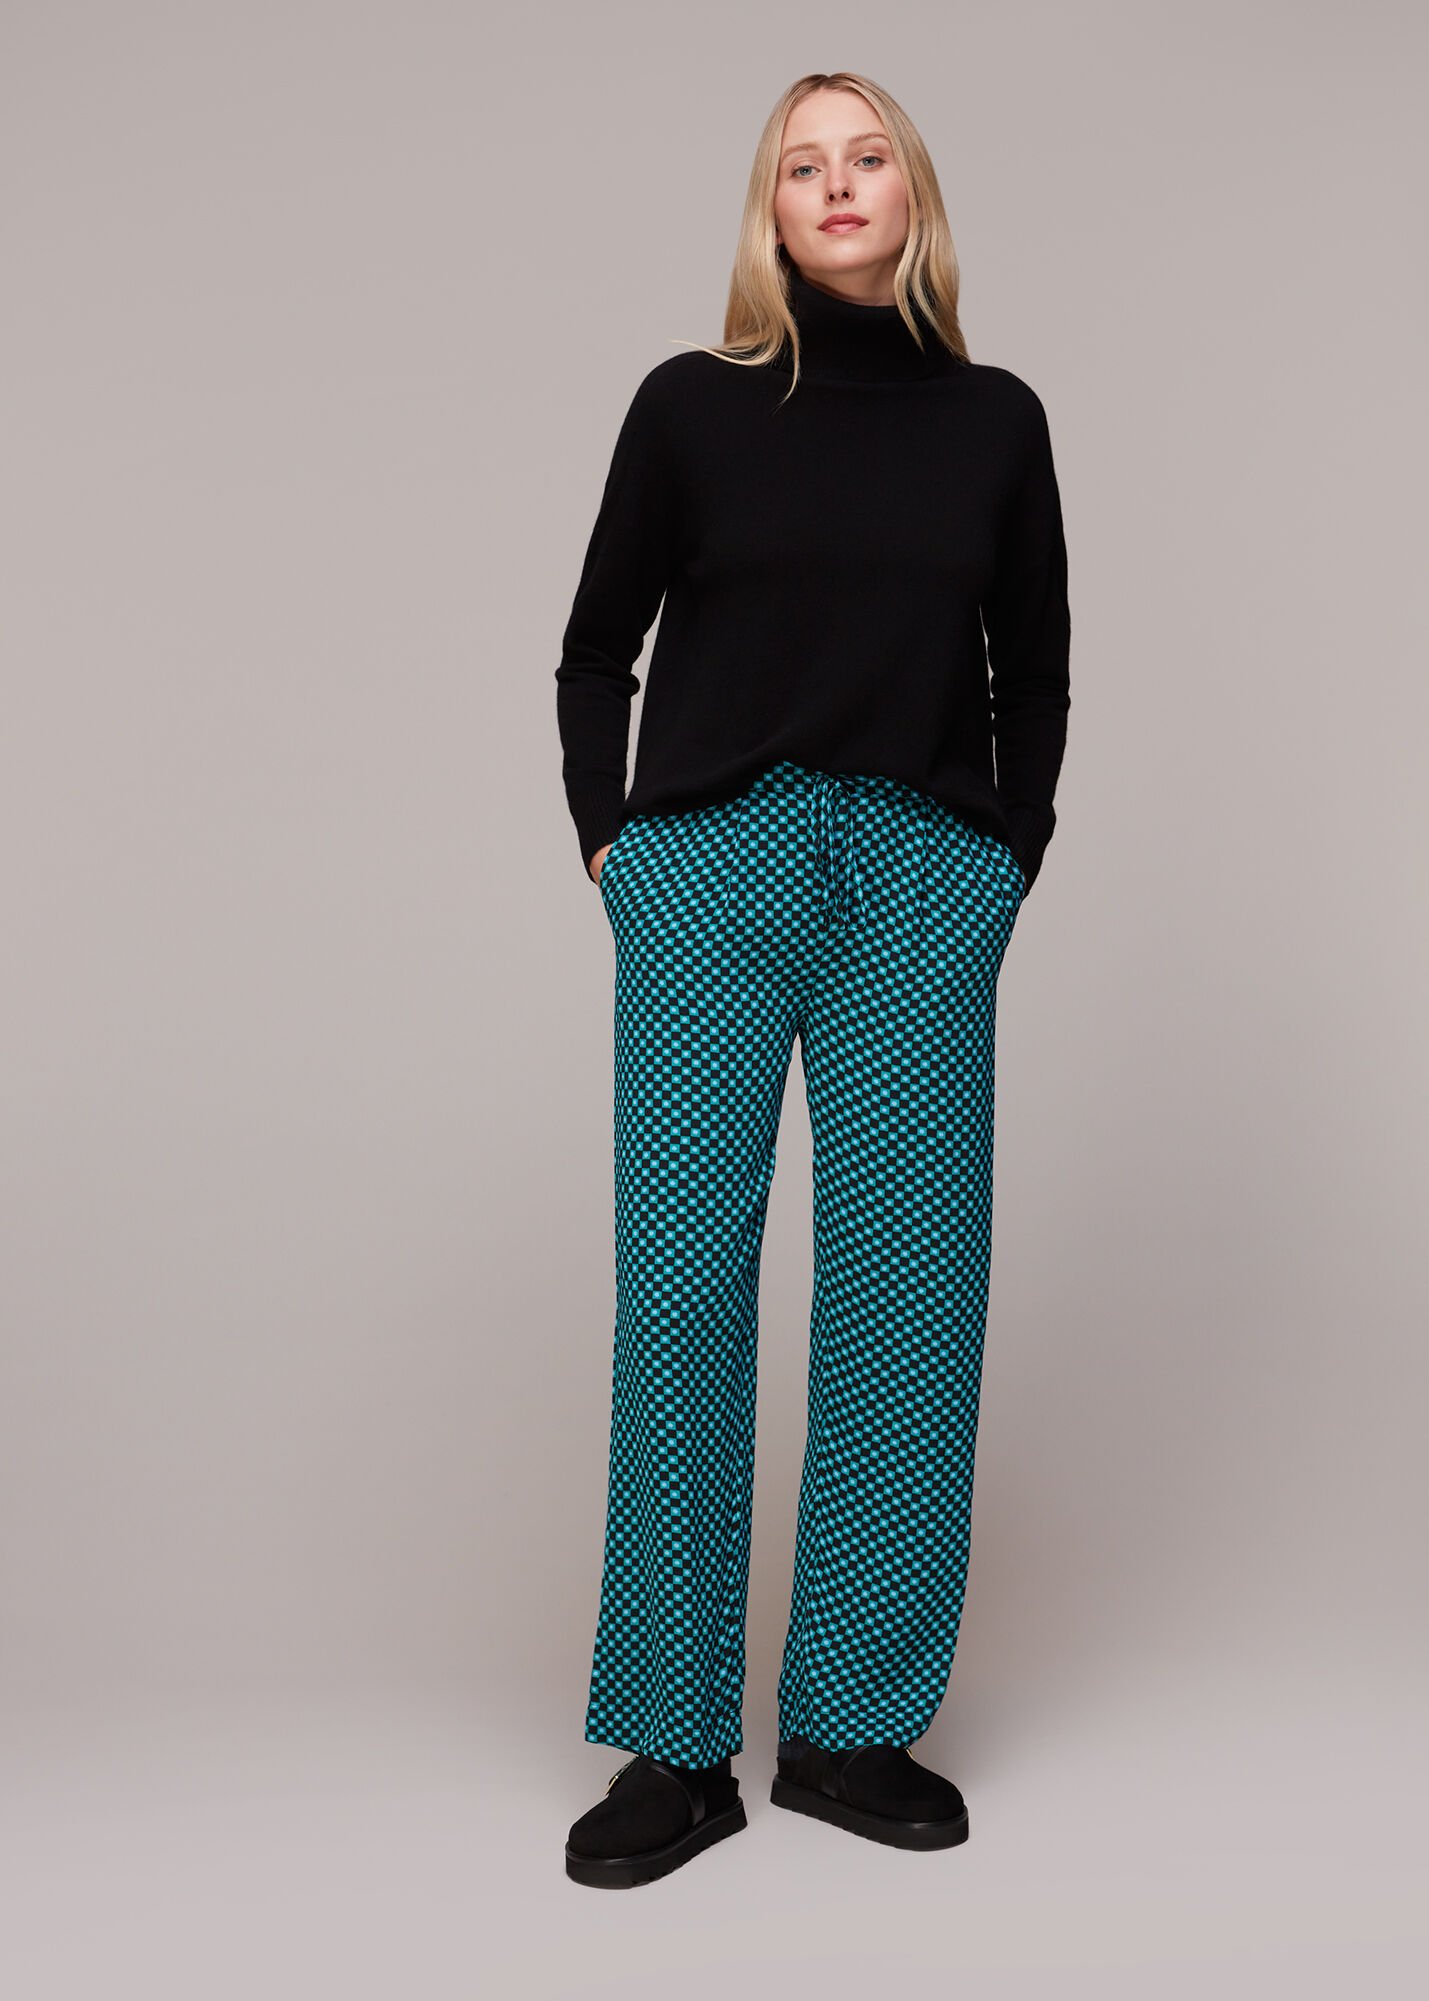 Star Print Trousers  N21  Official Online Store